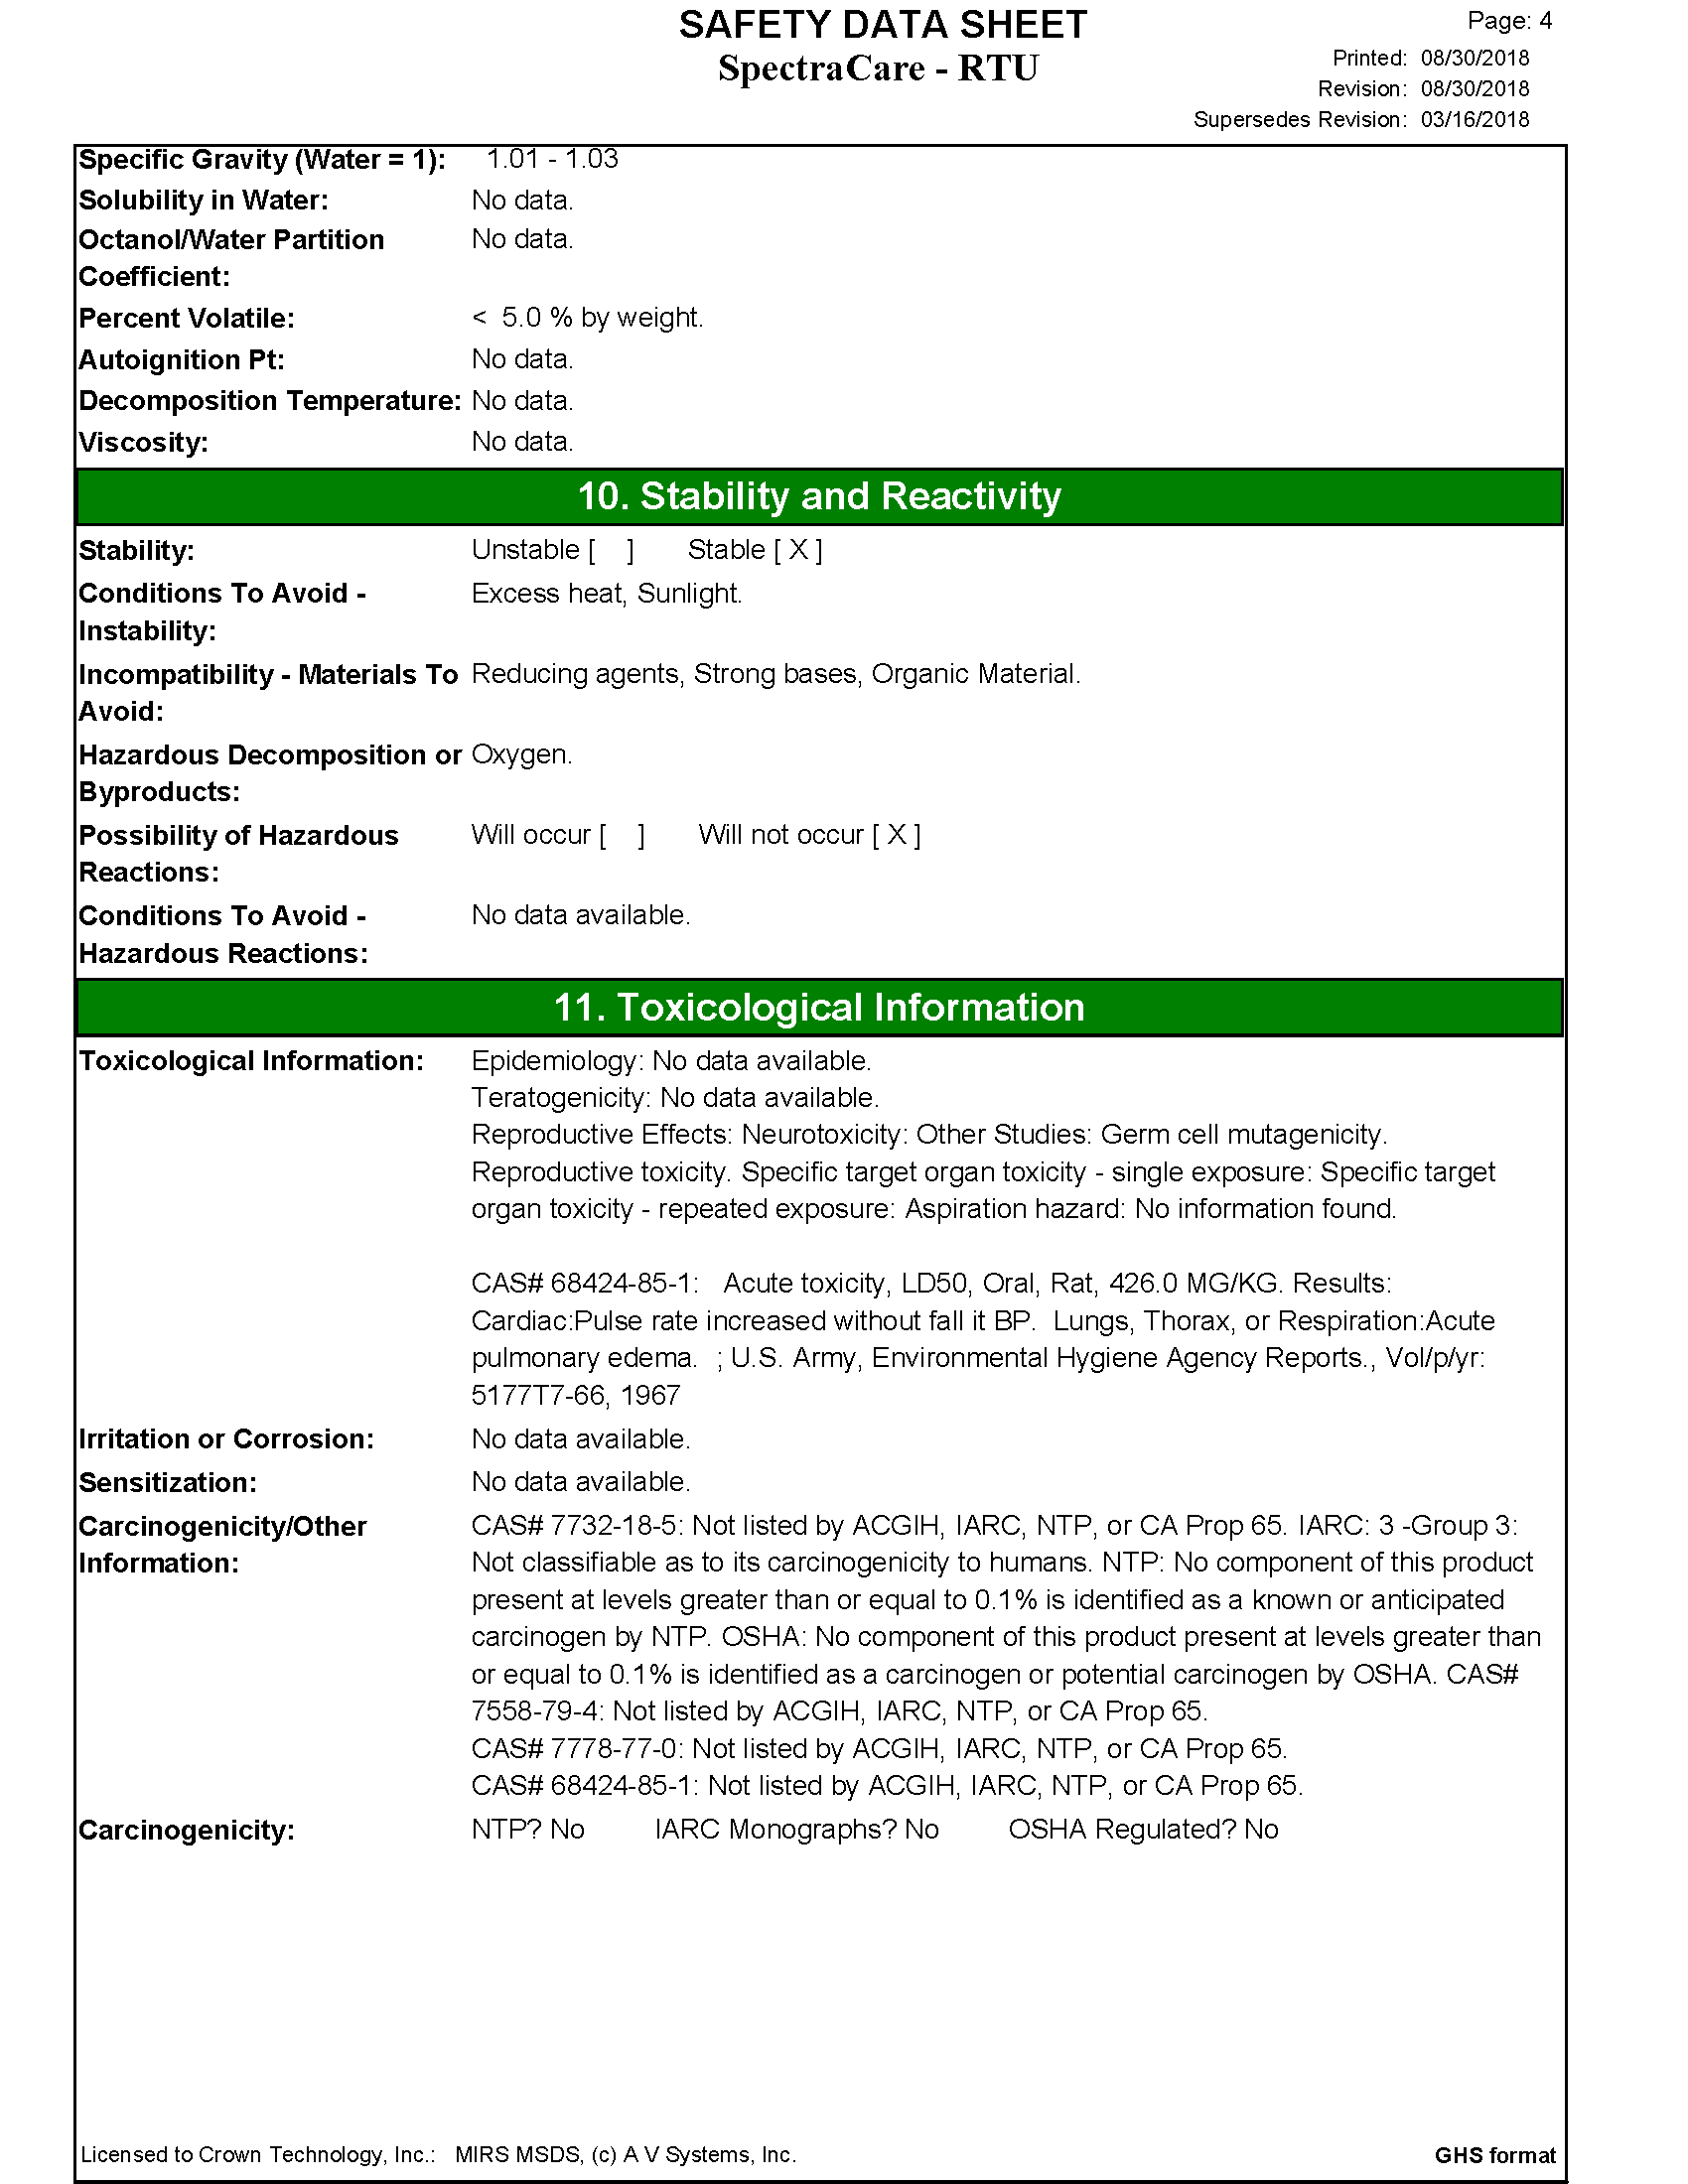 SpectraCare RTU_SDS-Full_Page_4